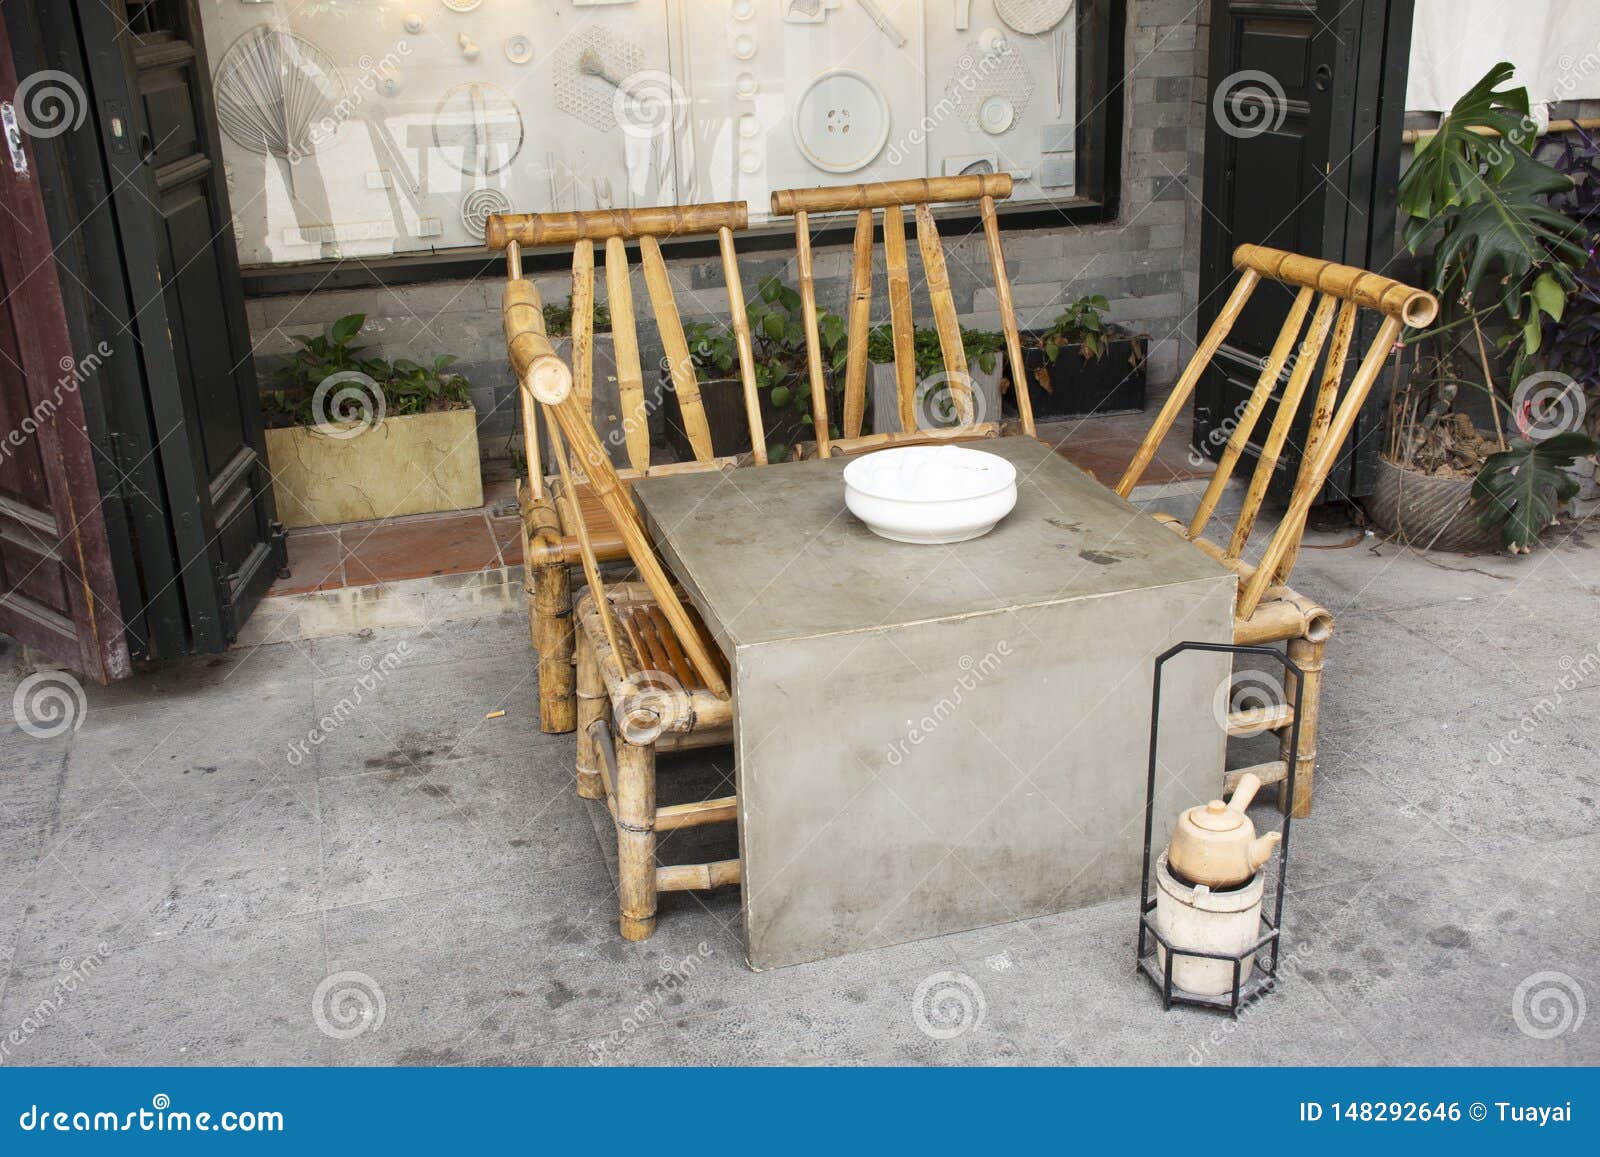 Decor Furniture Stone Table And Bamboo Chair Chinese Style For